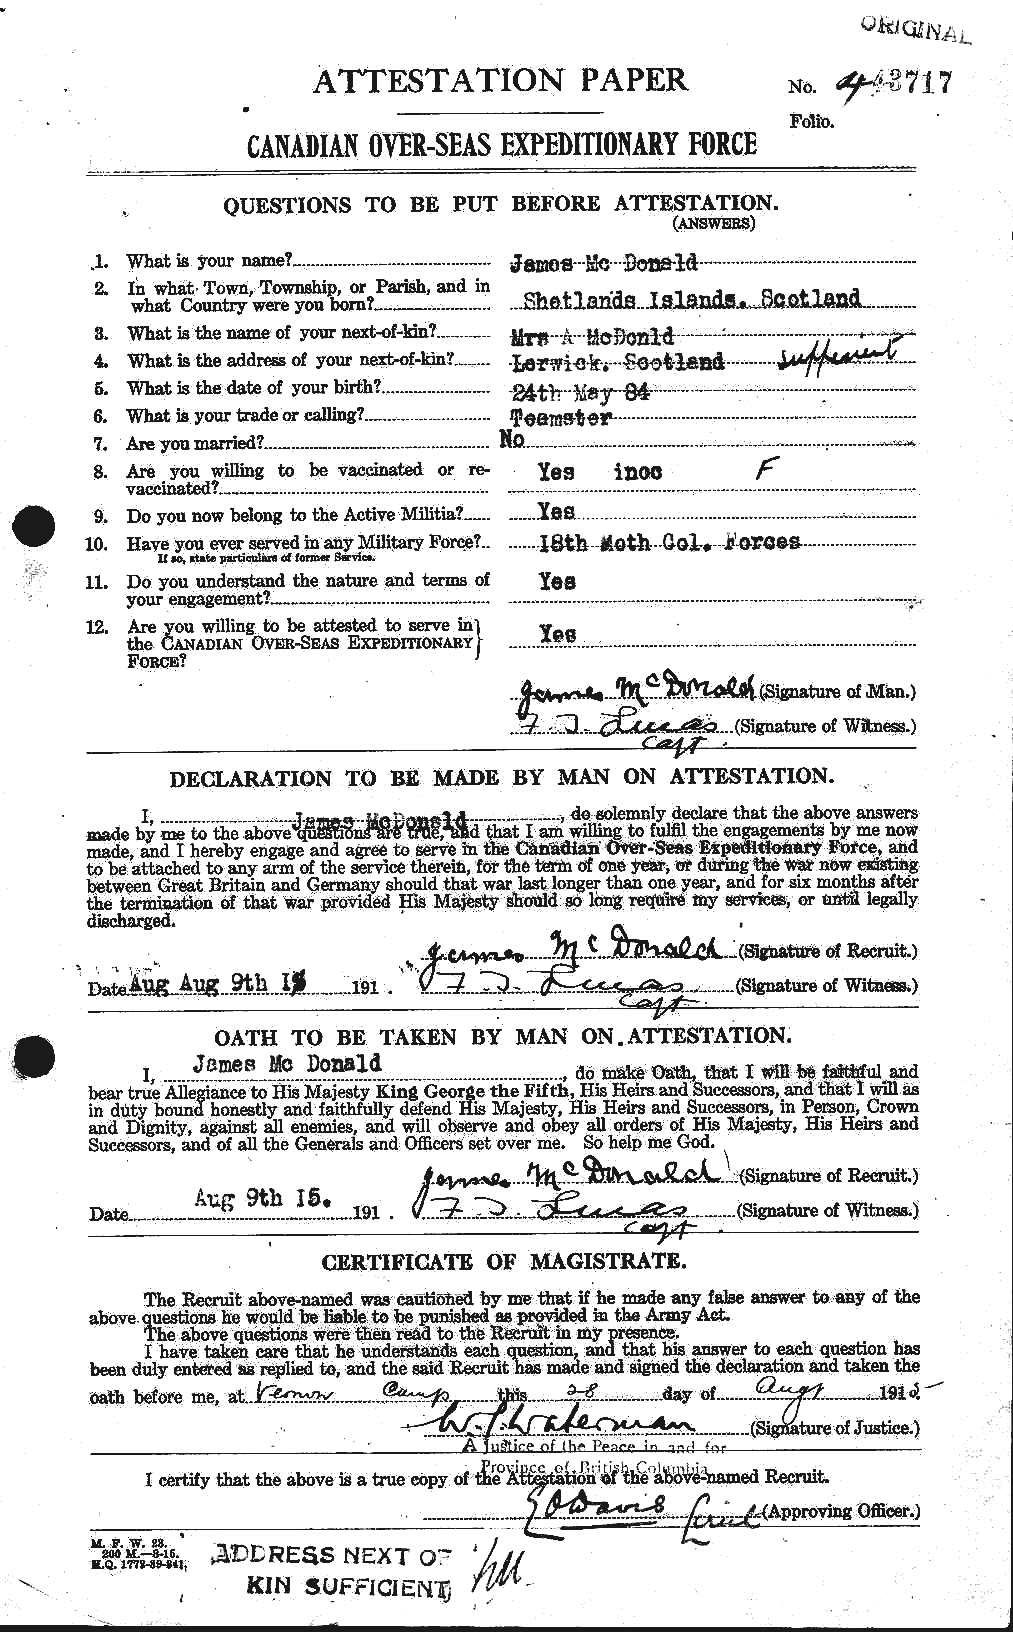 Personnel Records of the First World War - CEF 521613a